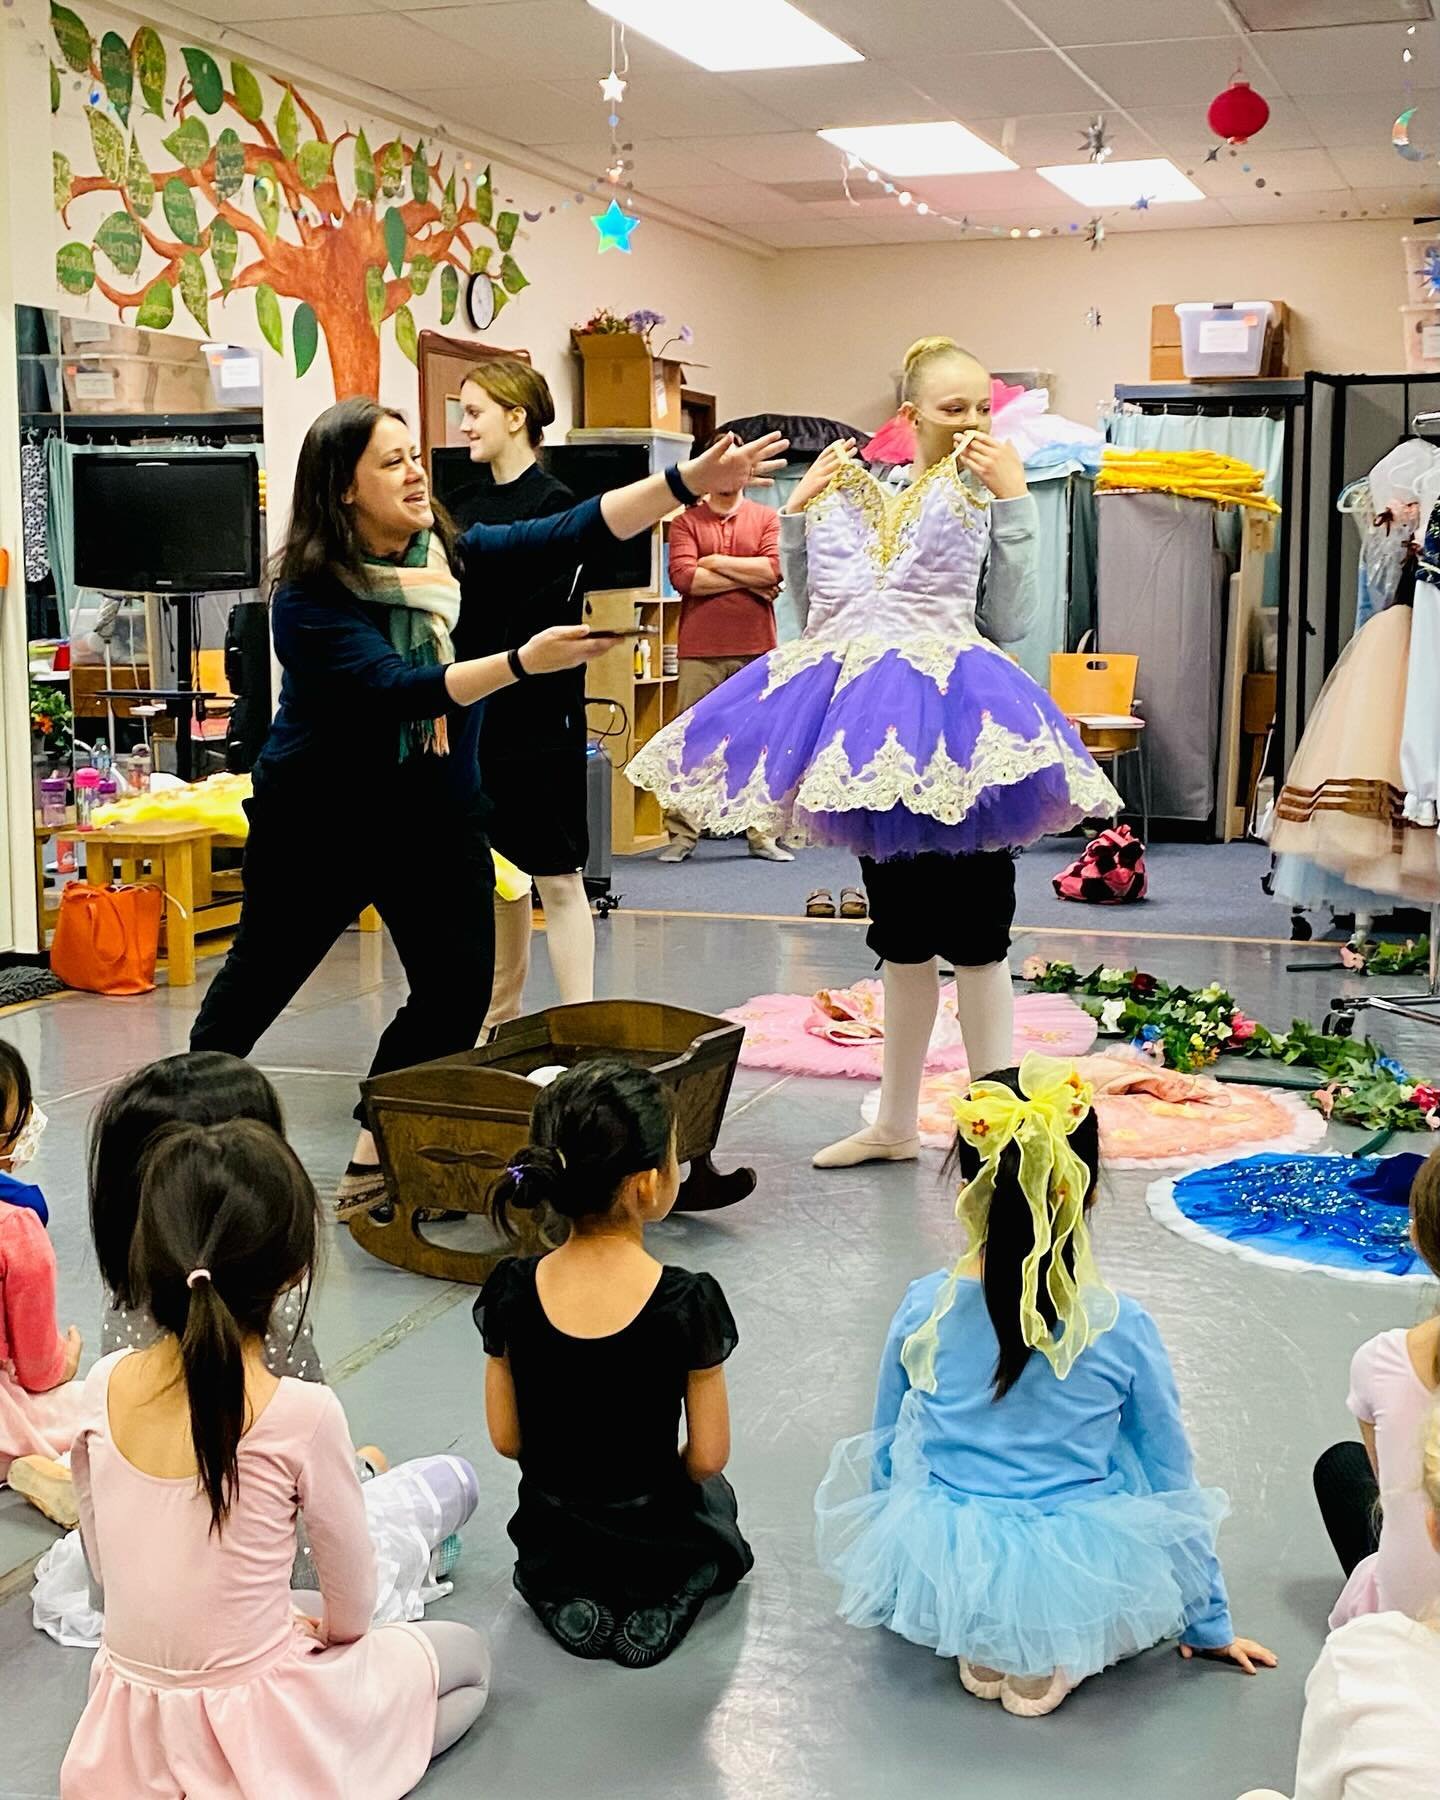 Throwback to our Sleeping Beauty children&rsquo;s class last Spring 👸🏻 

Our next children&rsquo;s event is this Saturday, April 27 from 10-11AM. Kiddos ages 4-9 are invited to explore the world of Copp&eacute;lia with us!

Scholarships are availab